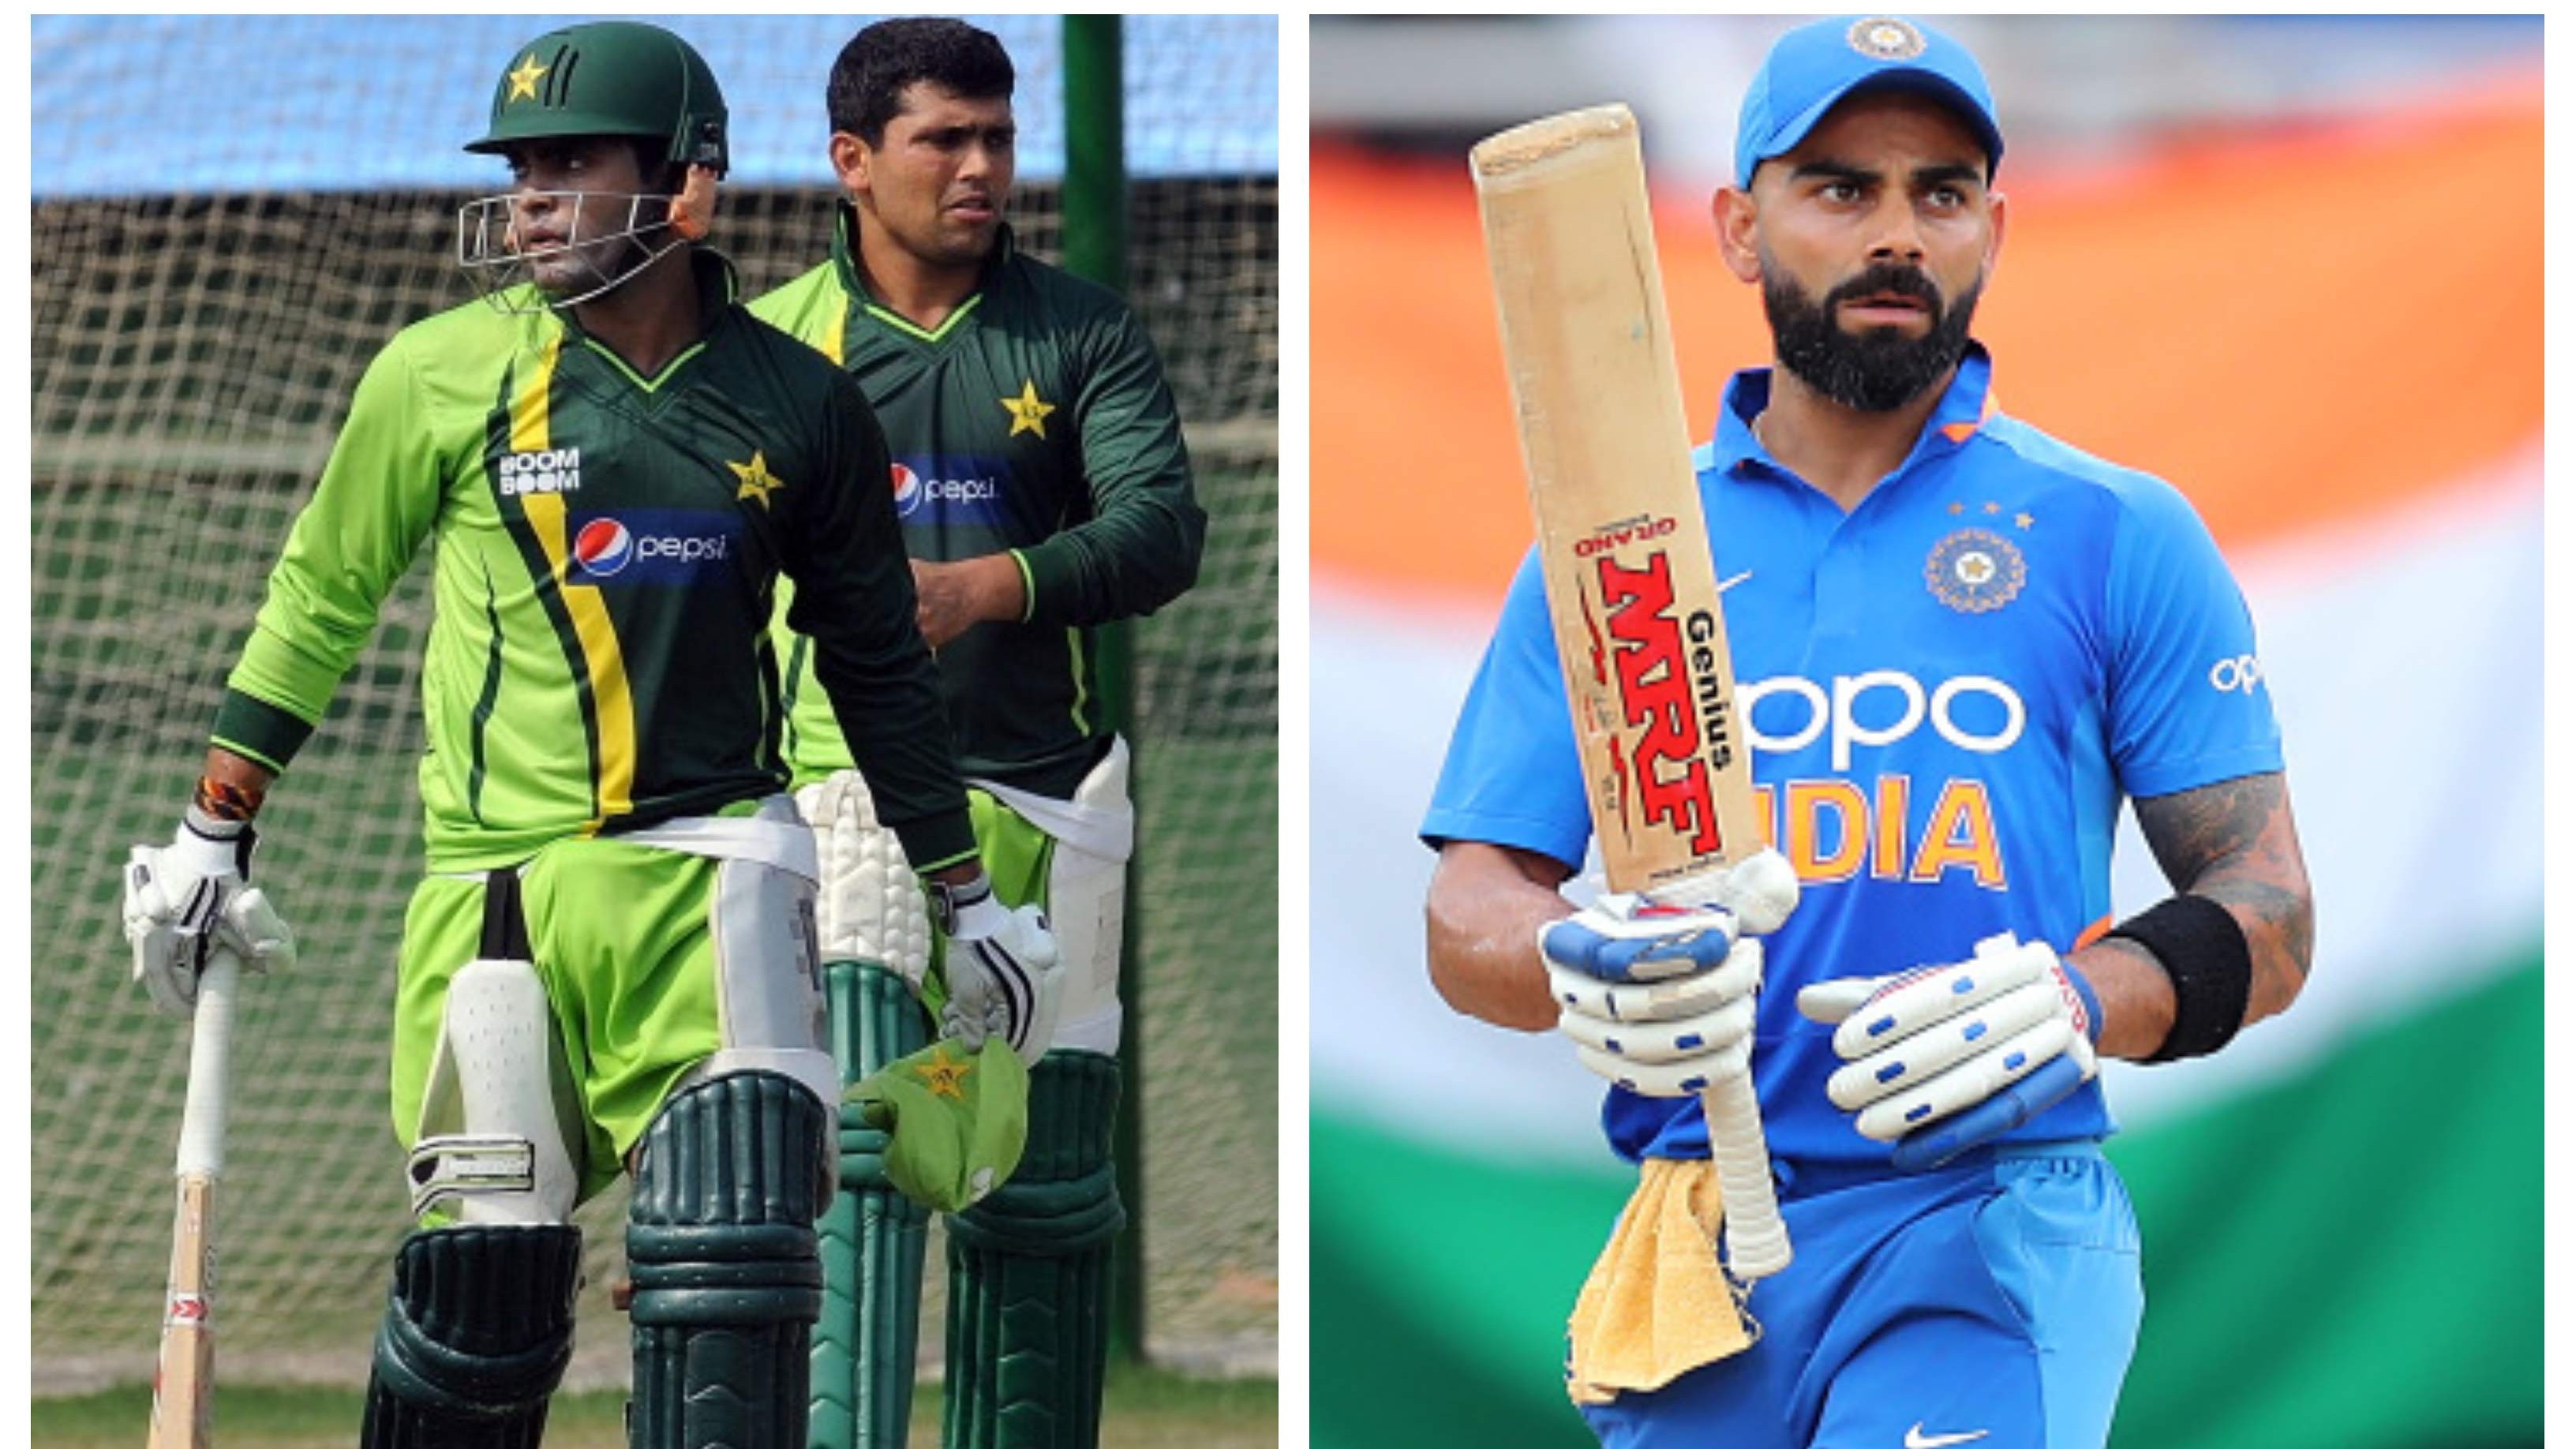 ‘Look how he has turned into world's No. 1 batter’ – Kamran Akmal advices brother Umar to learn from Kohli